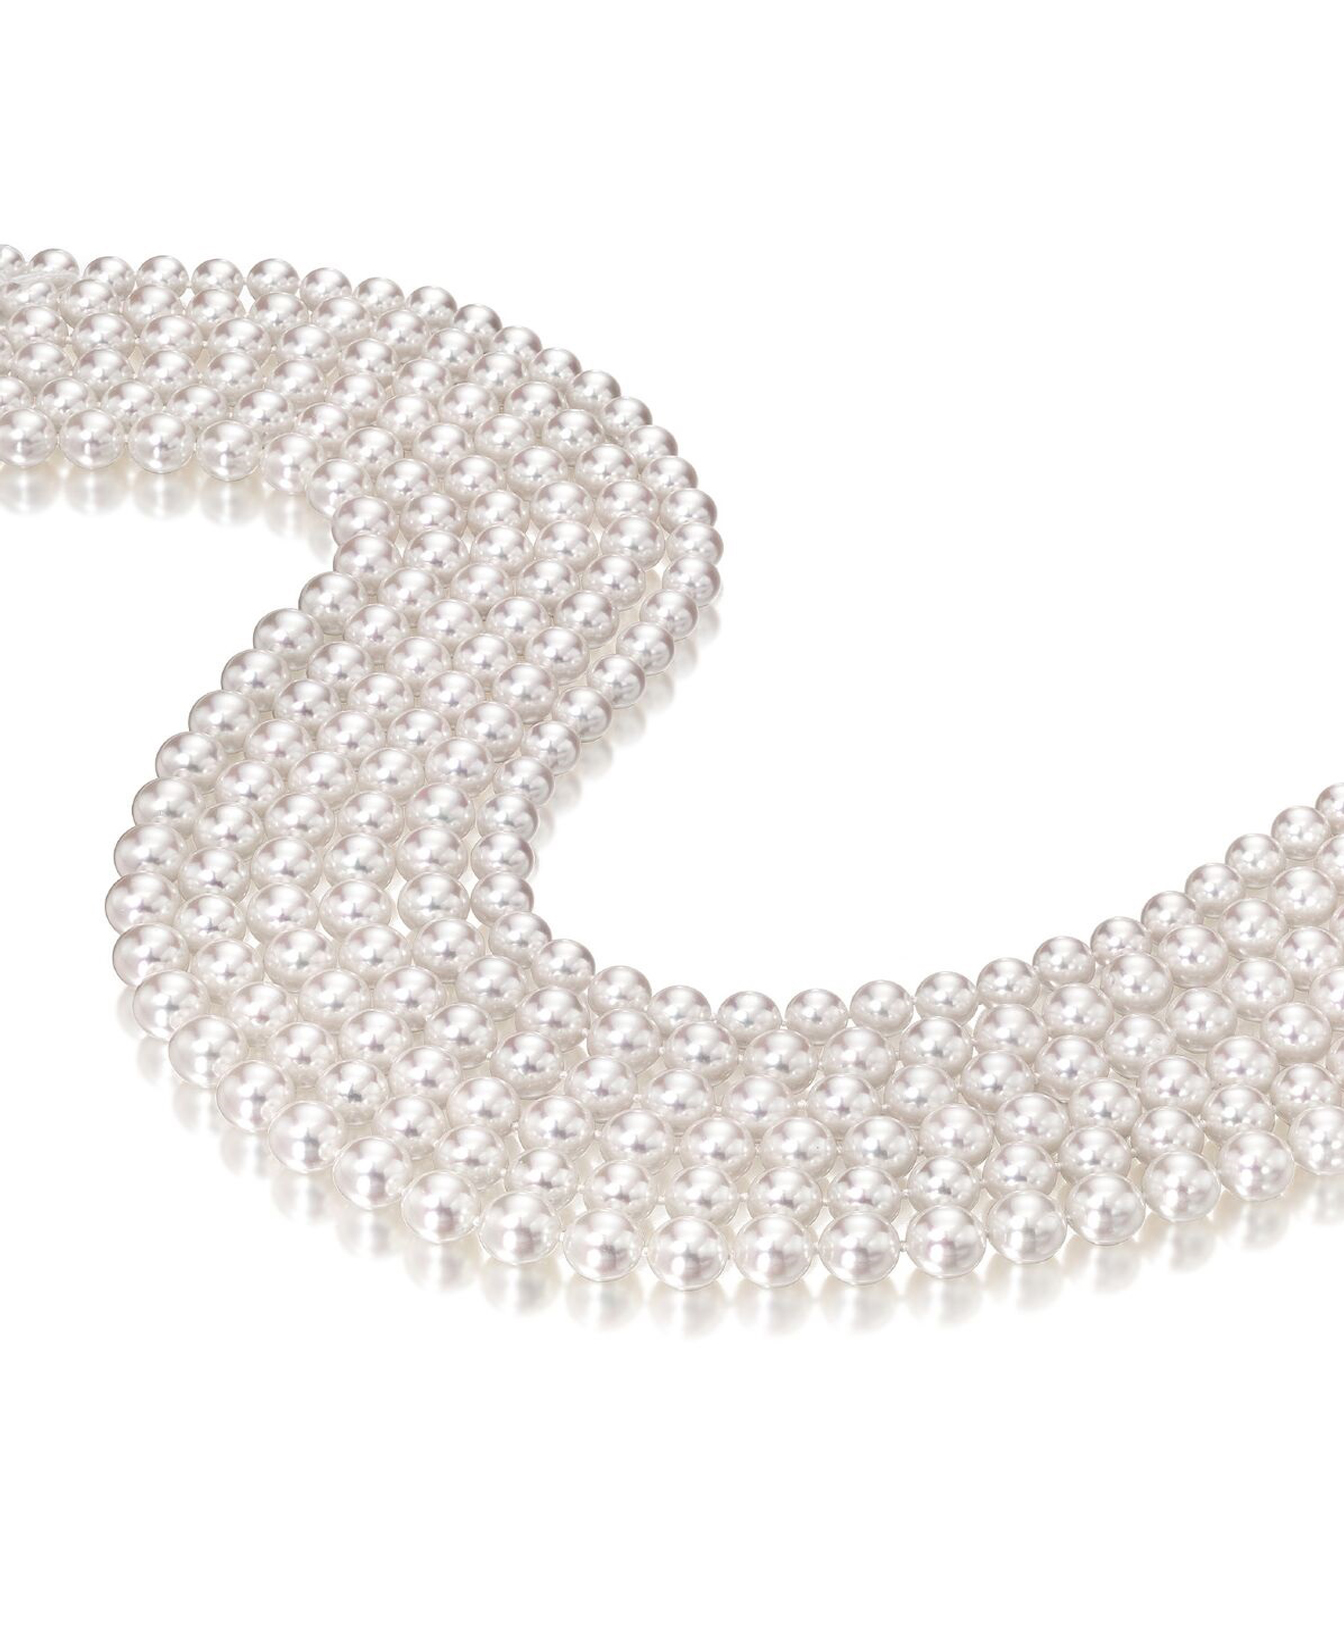 White Japanese Akoya Pearl Necklace, 7.0-7.5mm - AA+ Quality - Pure Pearls